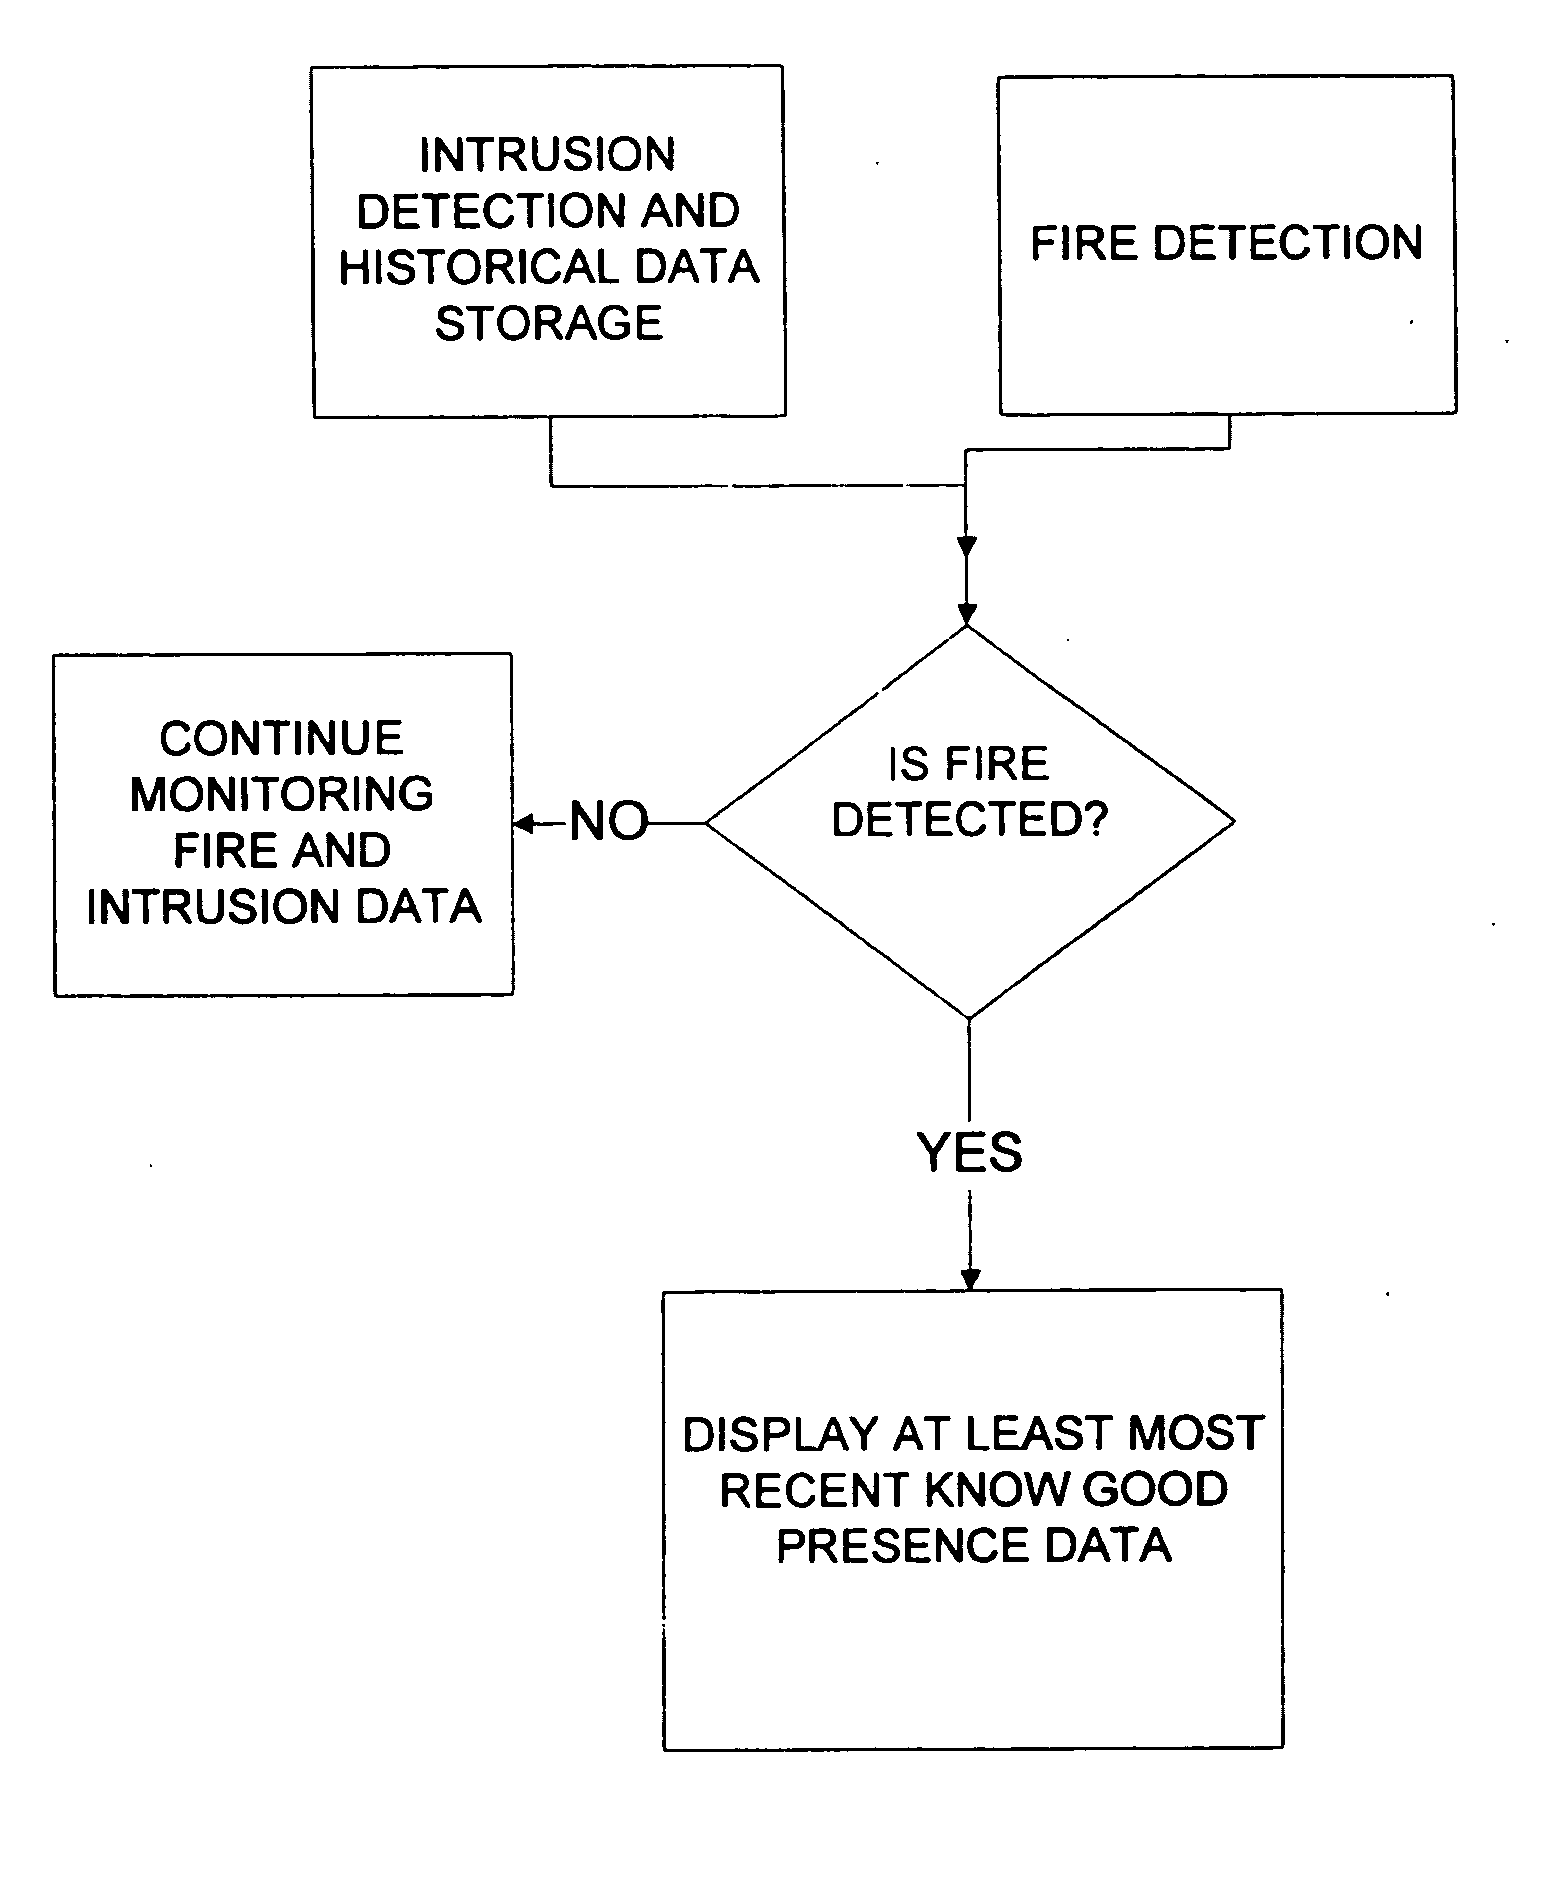 Building occupant location and fire detection system